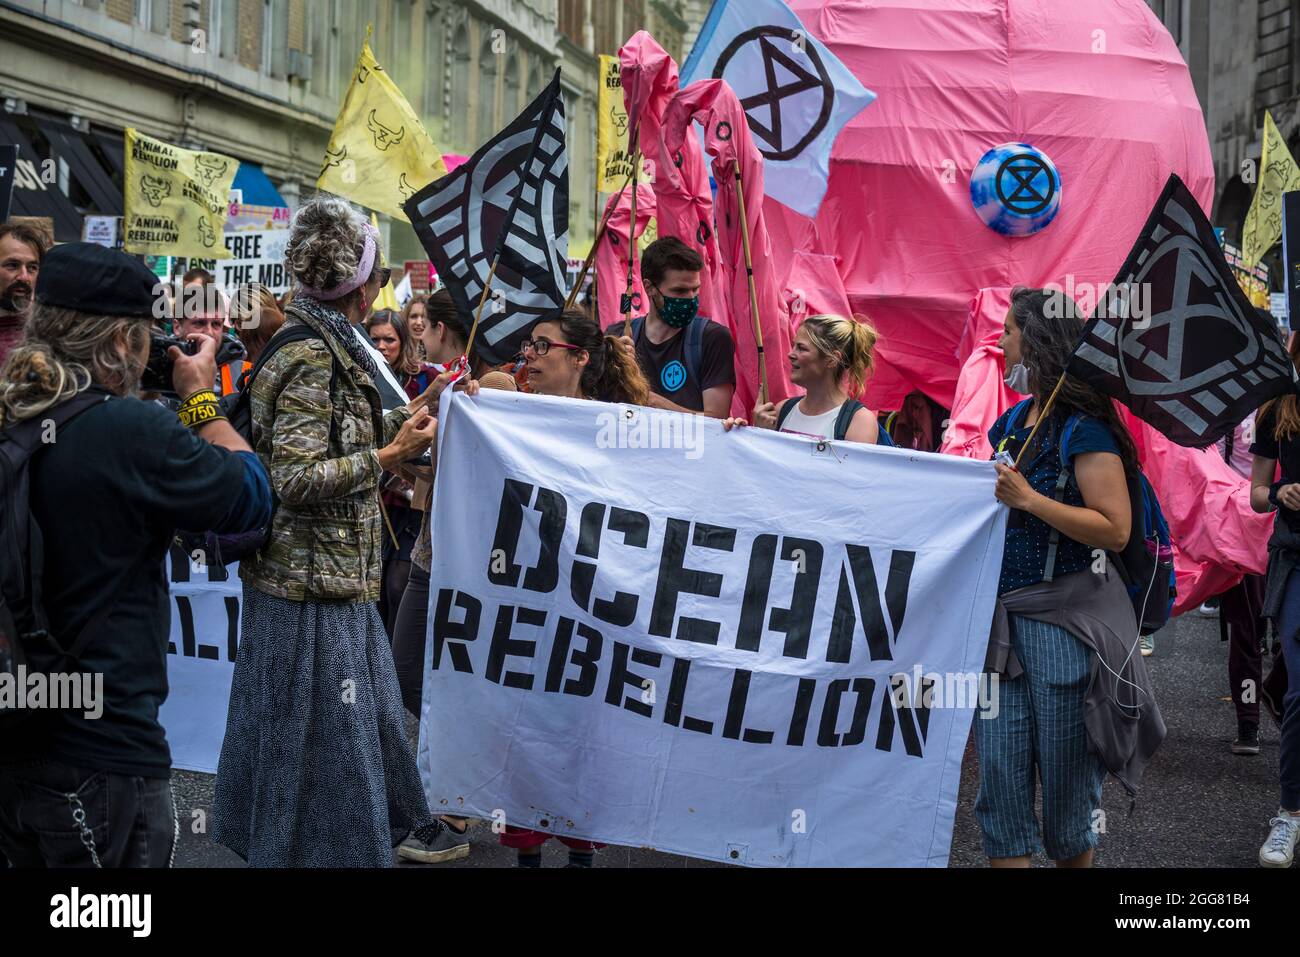 Ocean Rebellion,, National Animal Rights March, organised by Animal Rebellion and  Extinction Rebellion in the City of London, England, UK. Several thousand people joined the group that campaigns to transition our food system to plant-based system in order to tackle the climate emergency.  August 28 2021 Stock Photo